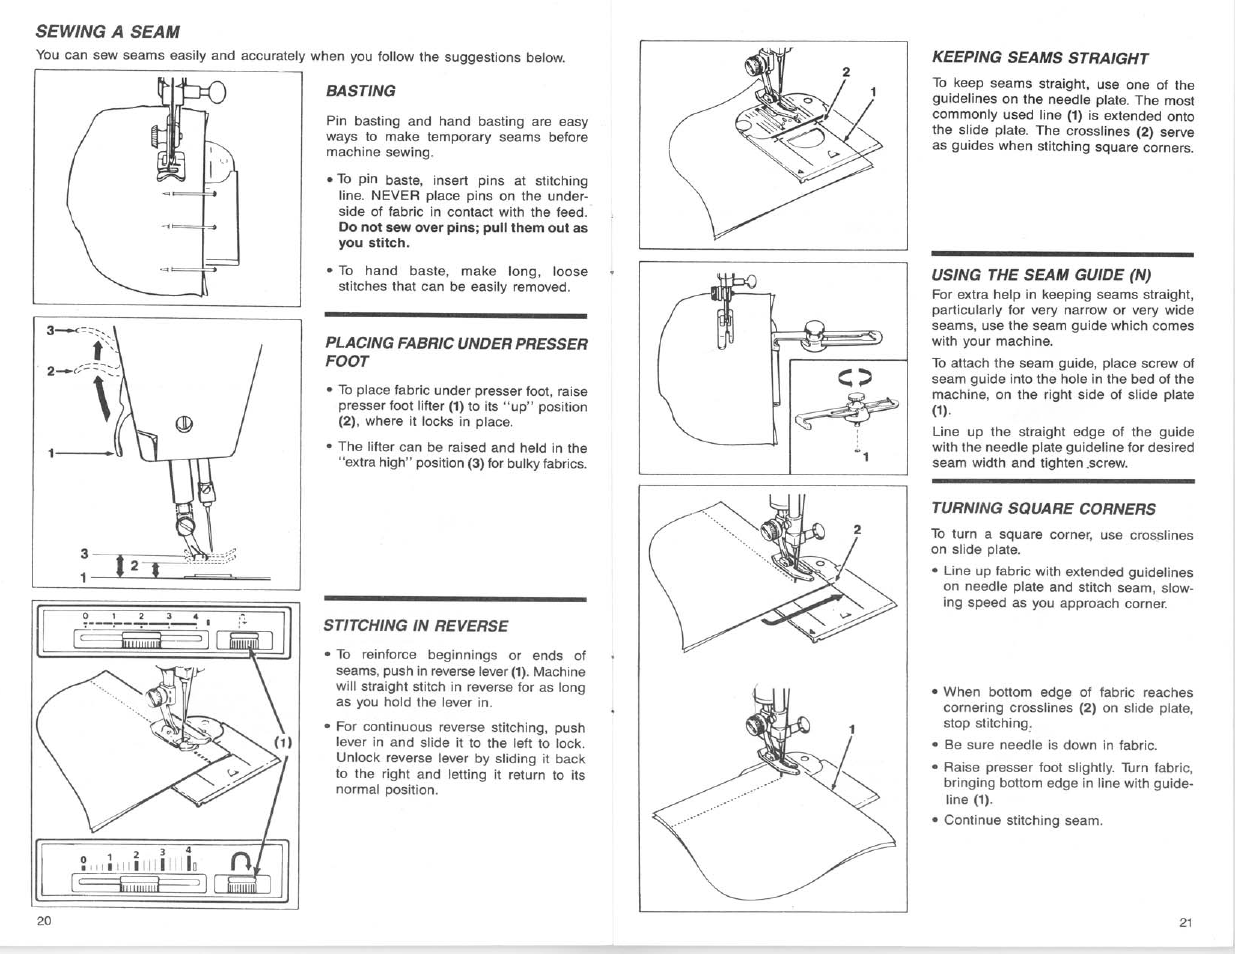 Basting, Placing fabric under presser foot, Stitching in reverse | Keeping seams straight, Using the seam guide (n) | SINGER 9124 User Manual | Page 12 / 25